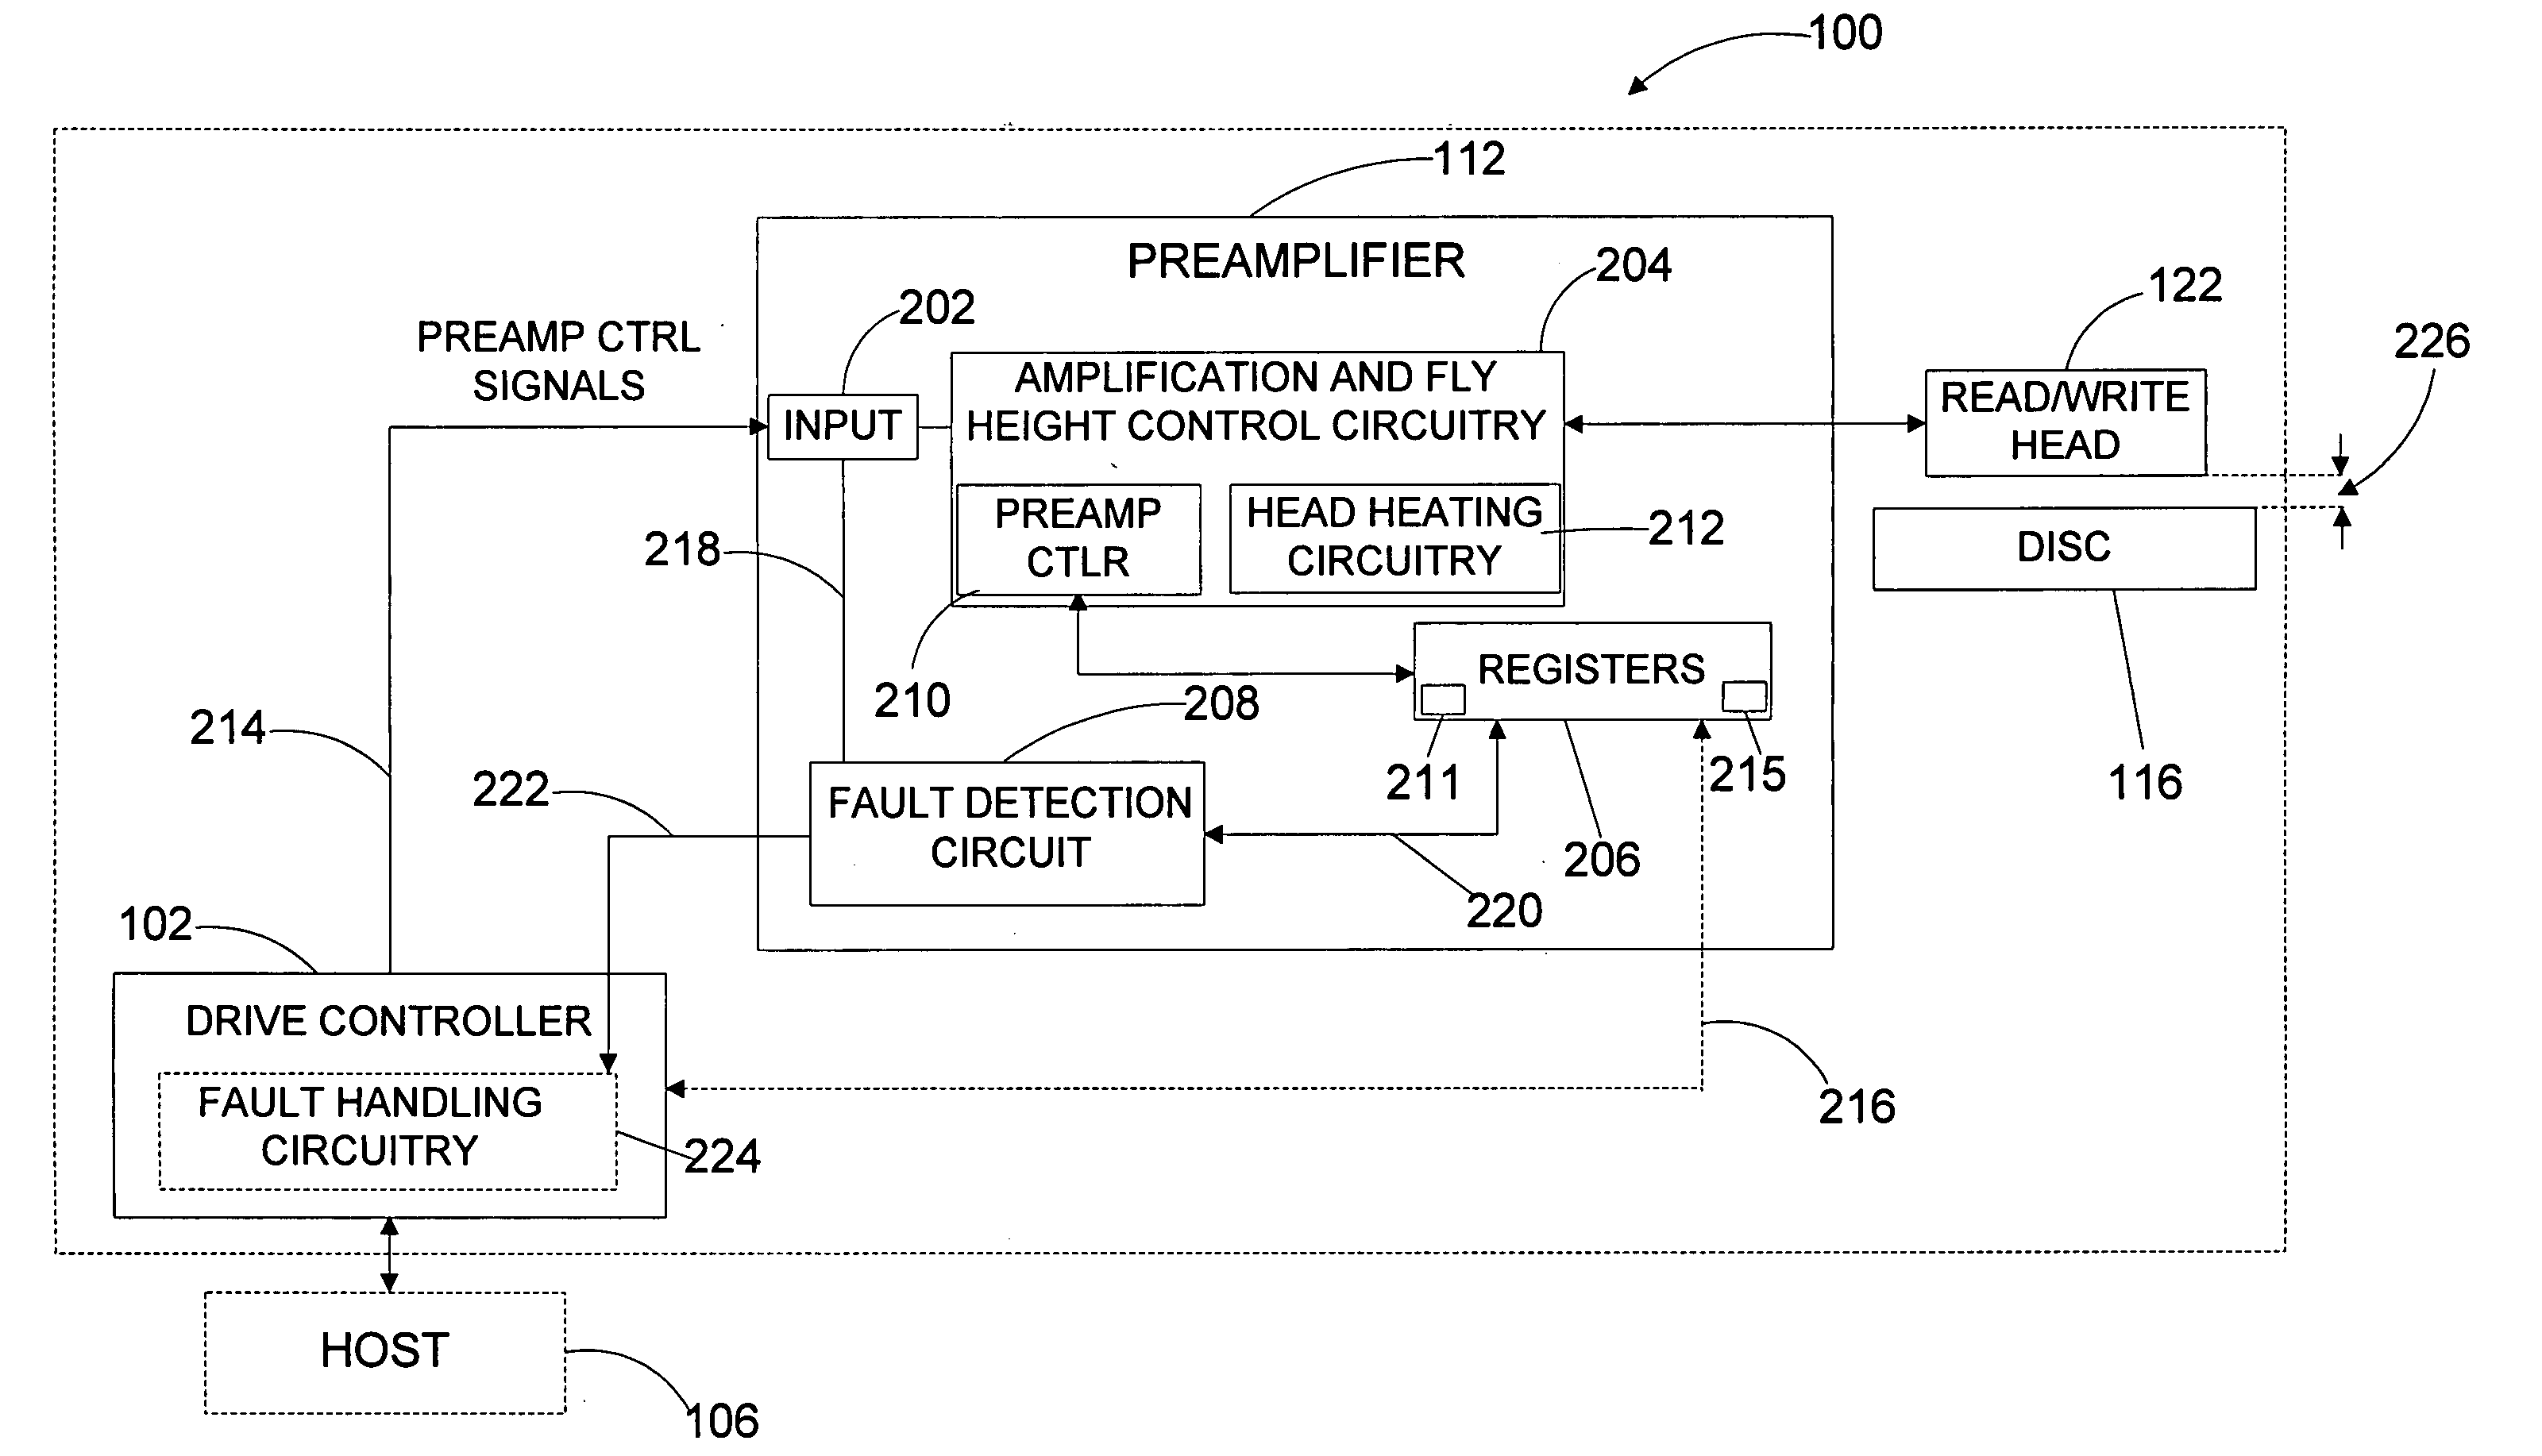 Preamplifier for use in data storage devices